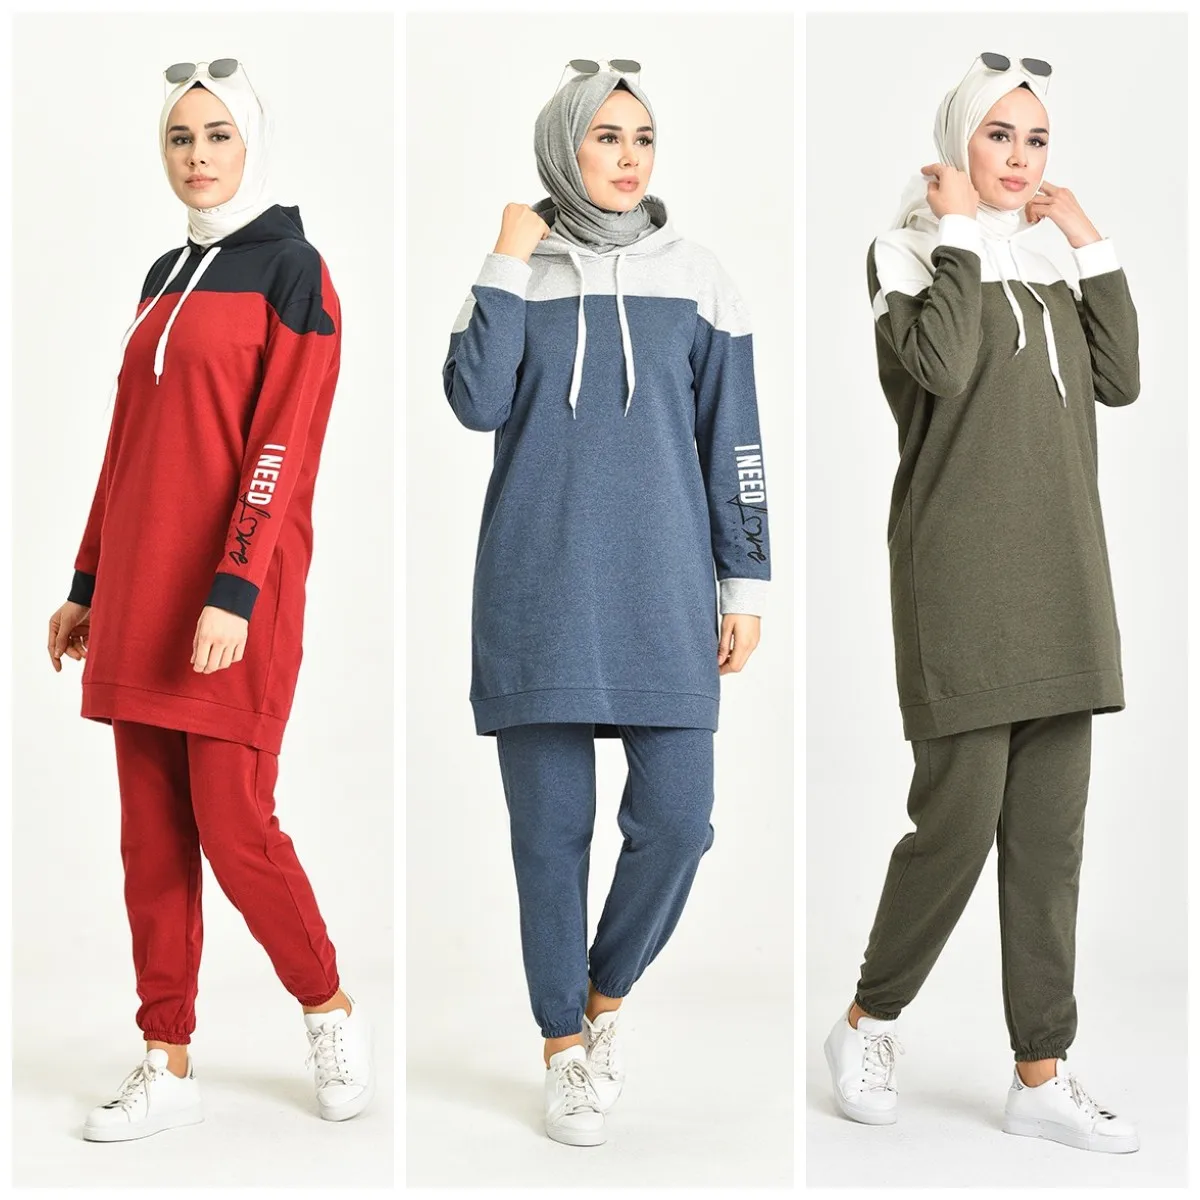 Two Pieces  Casual Cotton Woman Female  Tracksuit Sets Hoodie  Muslim Fashion Sportswear Long Sleeves Top Jogging Suits Outfit